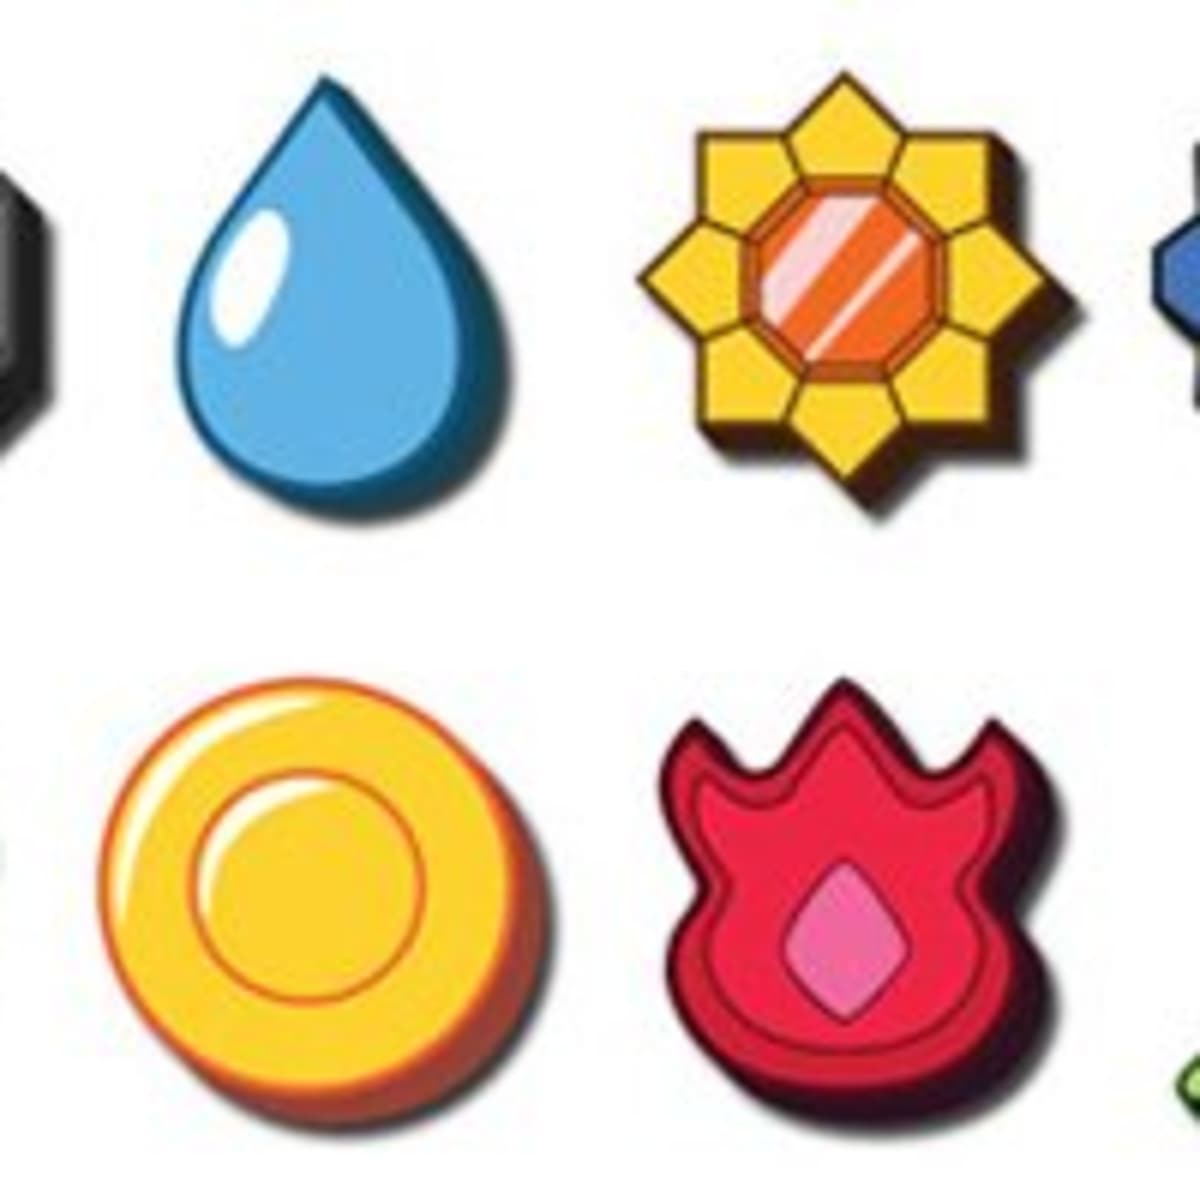 Fire Red and Leaf Green Pokémon Gym Leaders in Kanto (Badges Help) -  HubPages